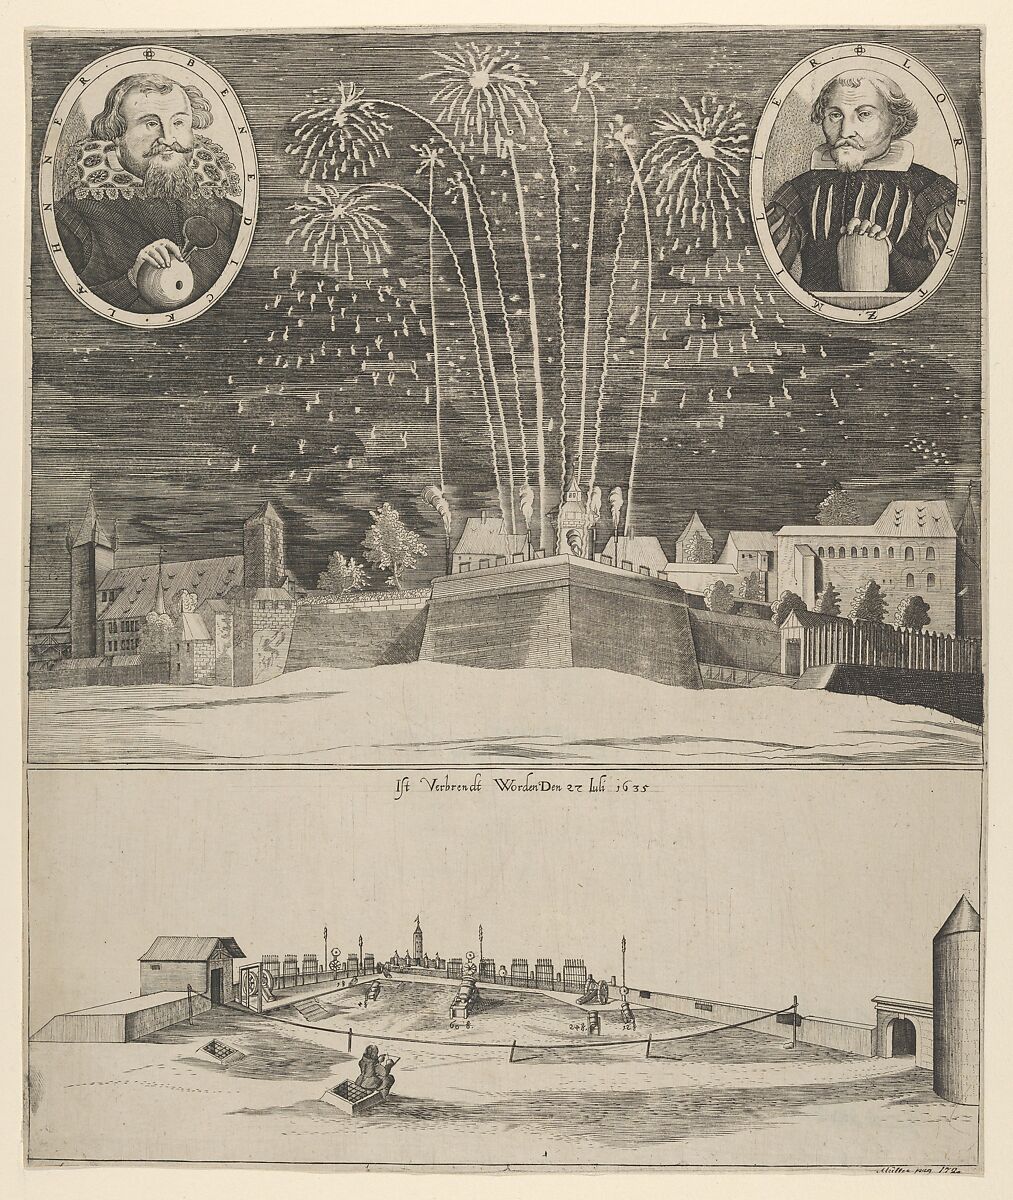 Fireworks display by Lorenz Müller as proof of his mastership, Nuremberg 1635, Anonymous, Etching, state before letters 